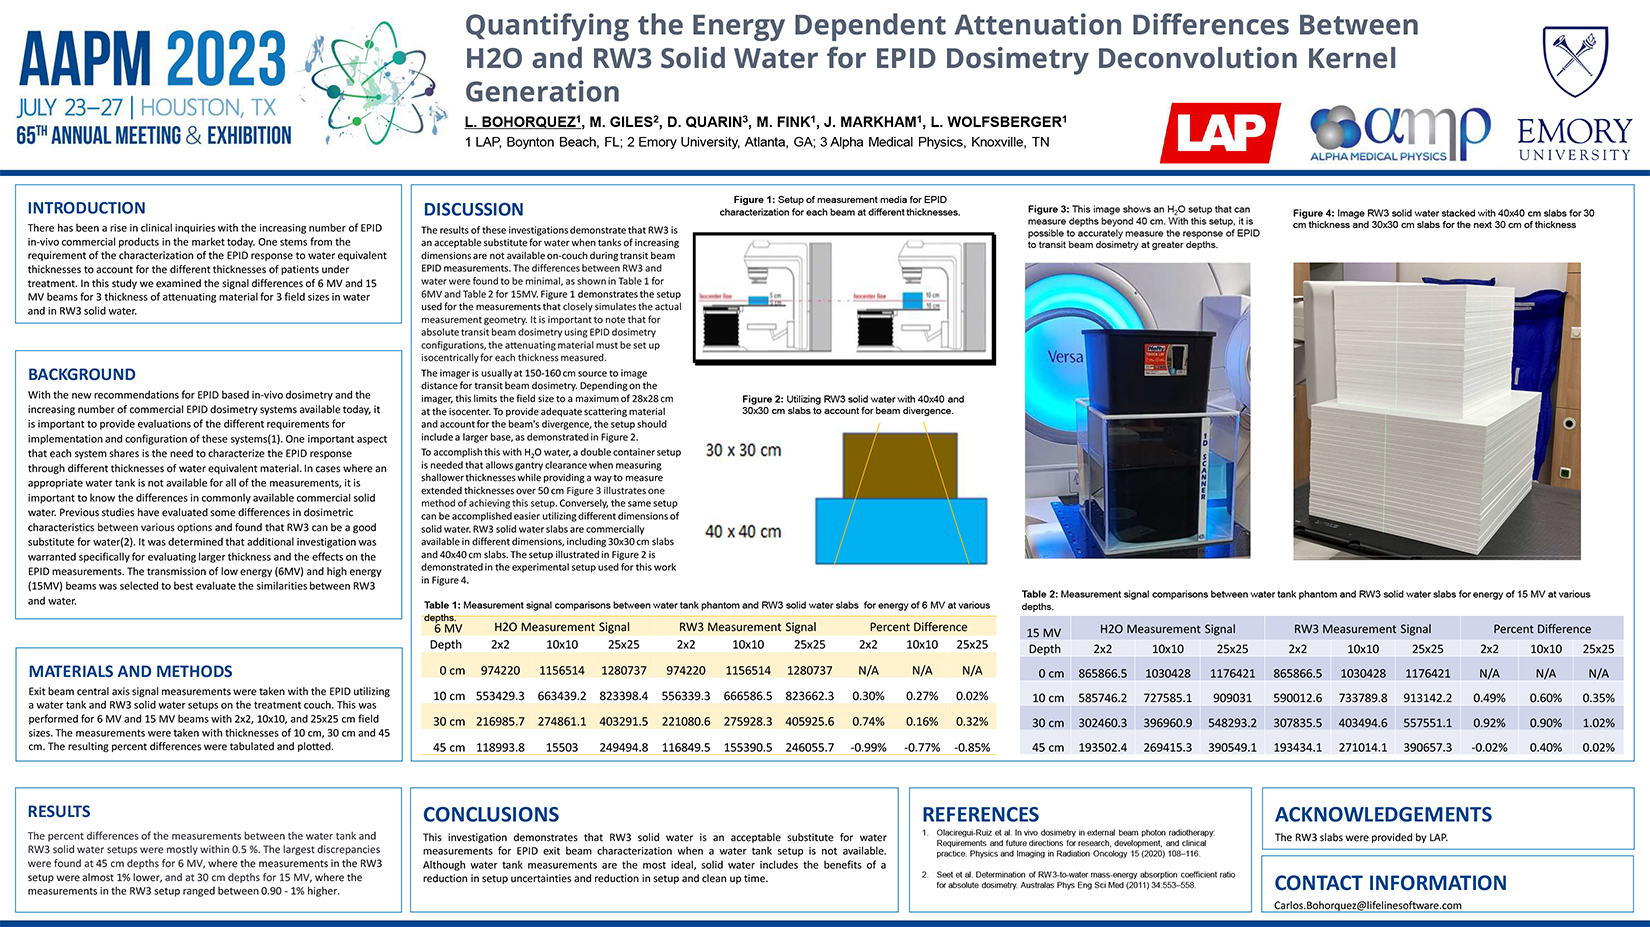 Quantifying the Energy Dependent Attenuation Differences Between H2O and RW3 Solid Water...